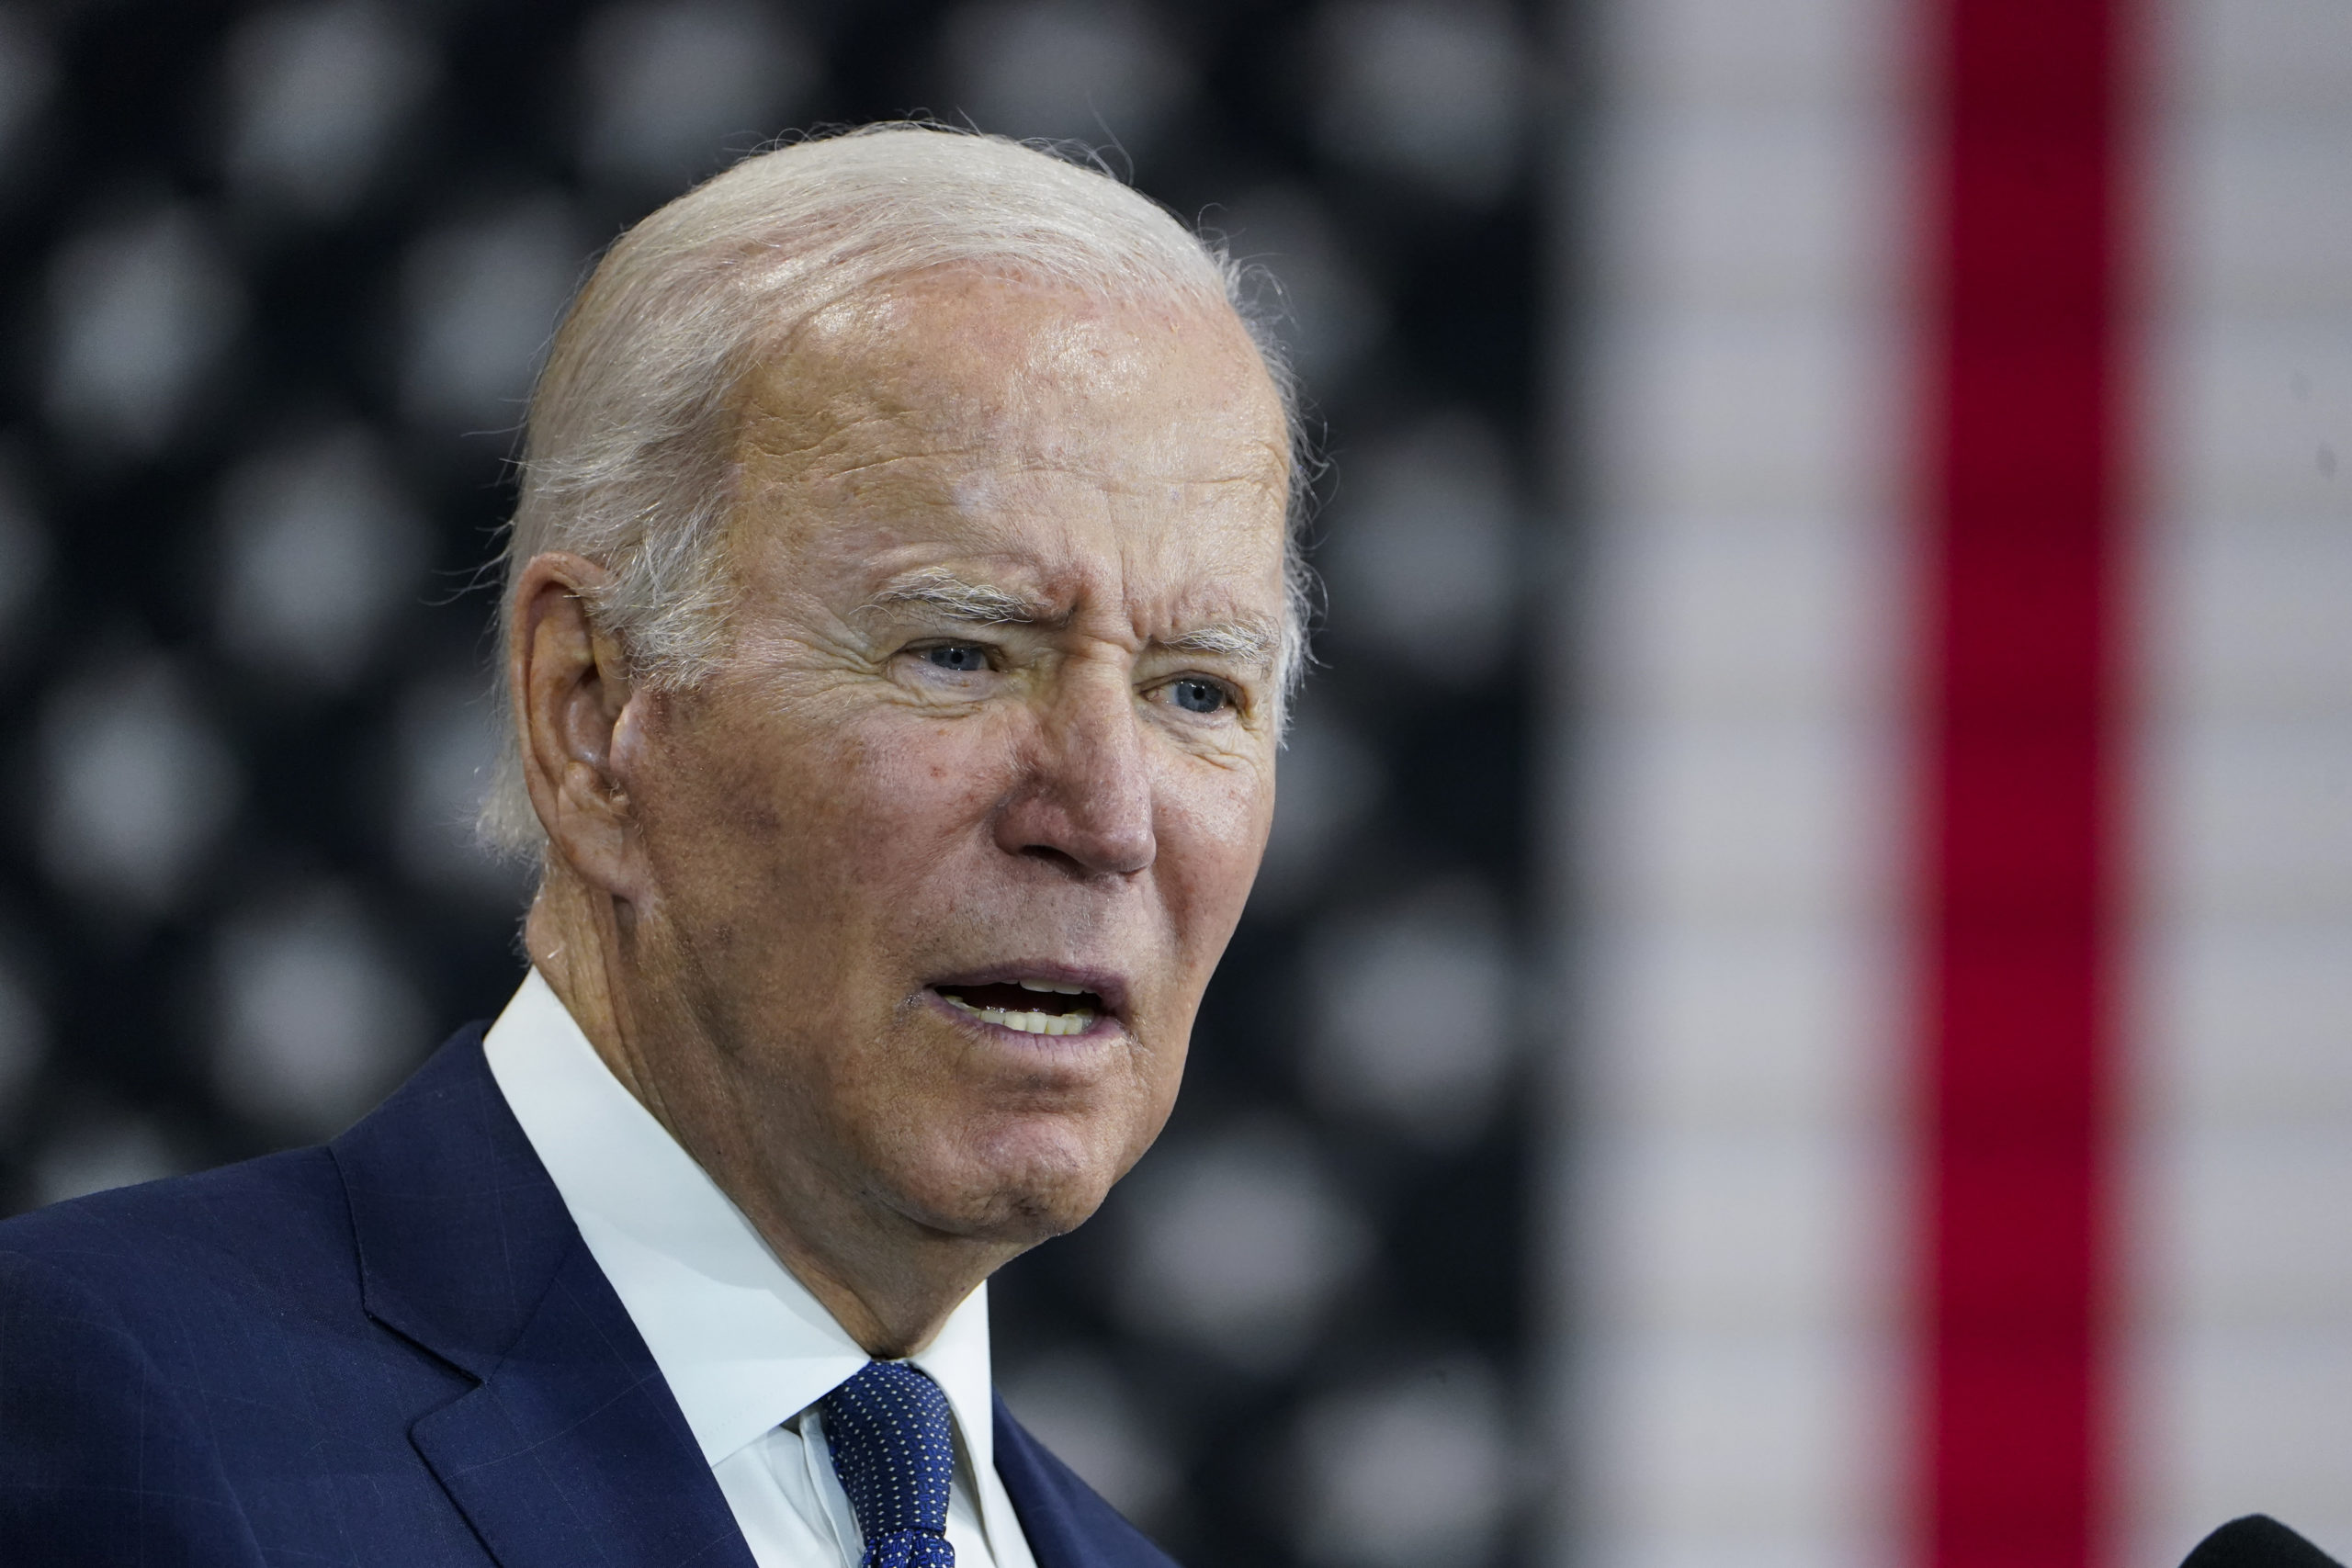 President Joe Biden speaks at the Volvo Group Powertrain Operations plant in Hagerstown, Maryland, on Friday. His comments the night before about nuclear “Armageddon” sent the White House scrambling for explanations on Friday.